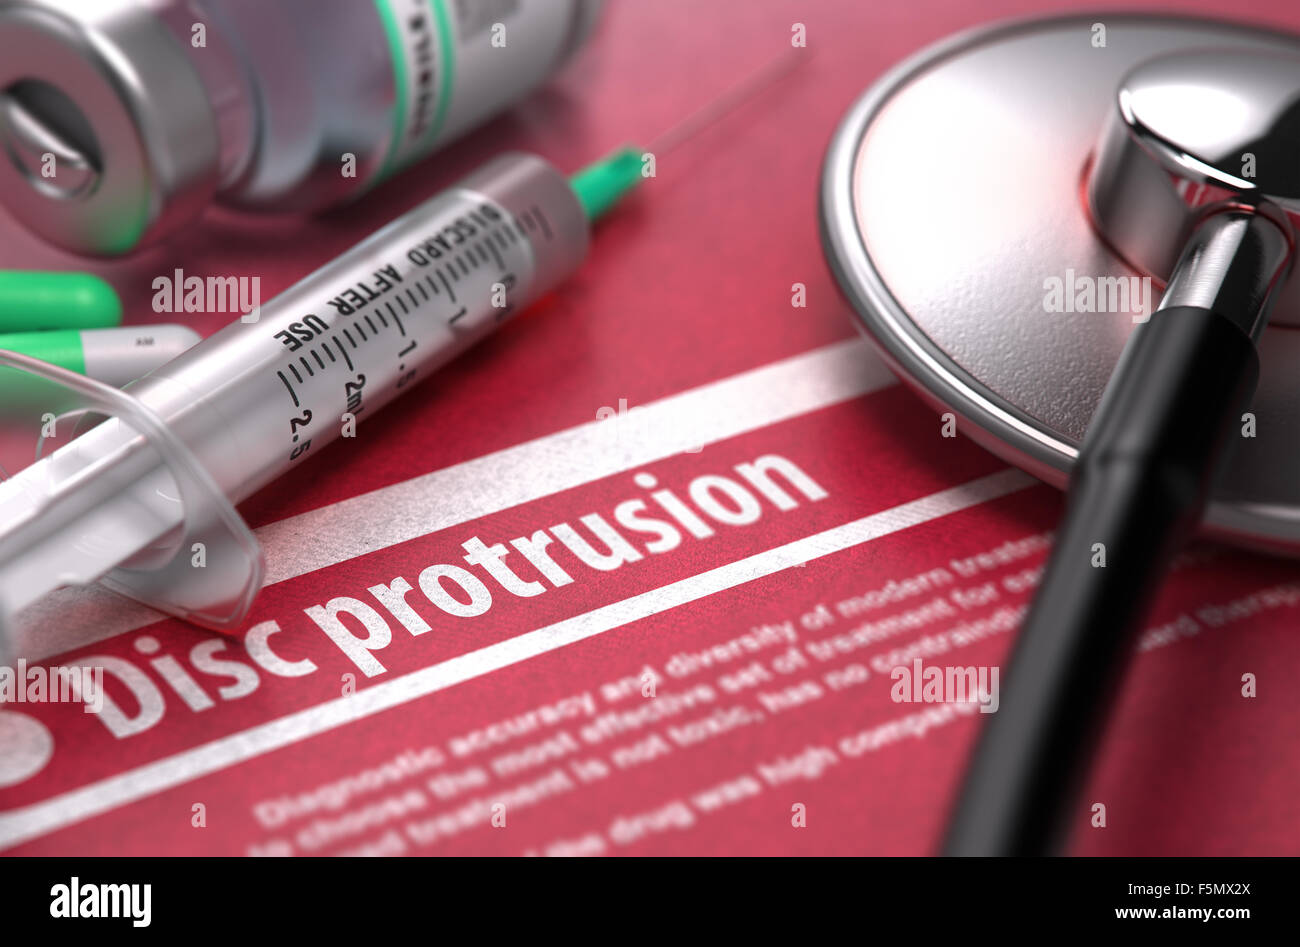 Disc protrusion. Medical Concept on Red Background. Stock Photo